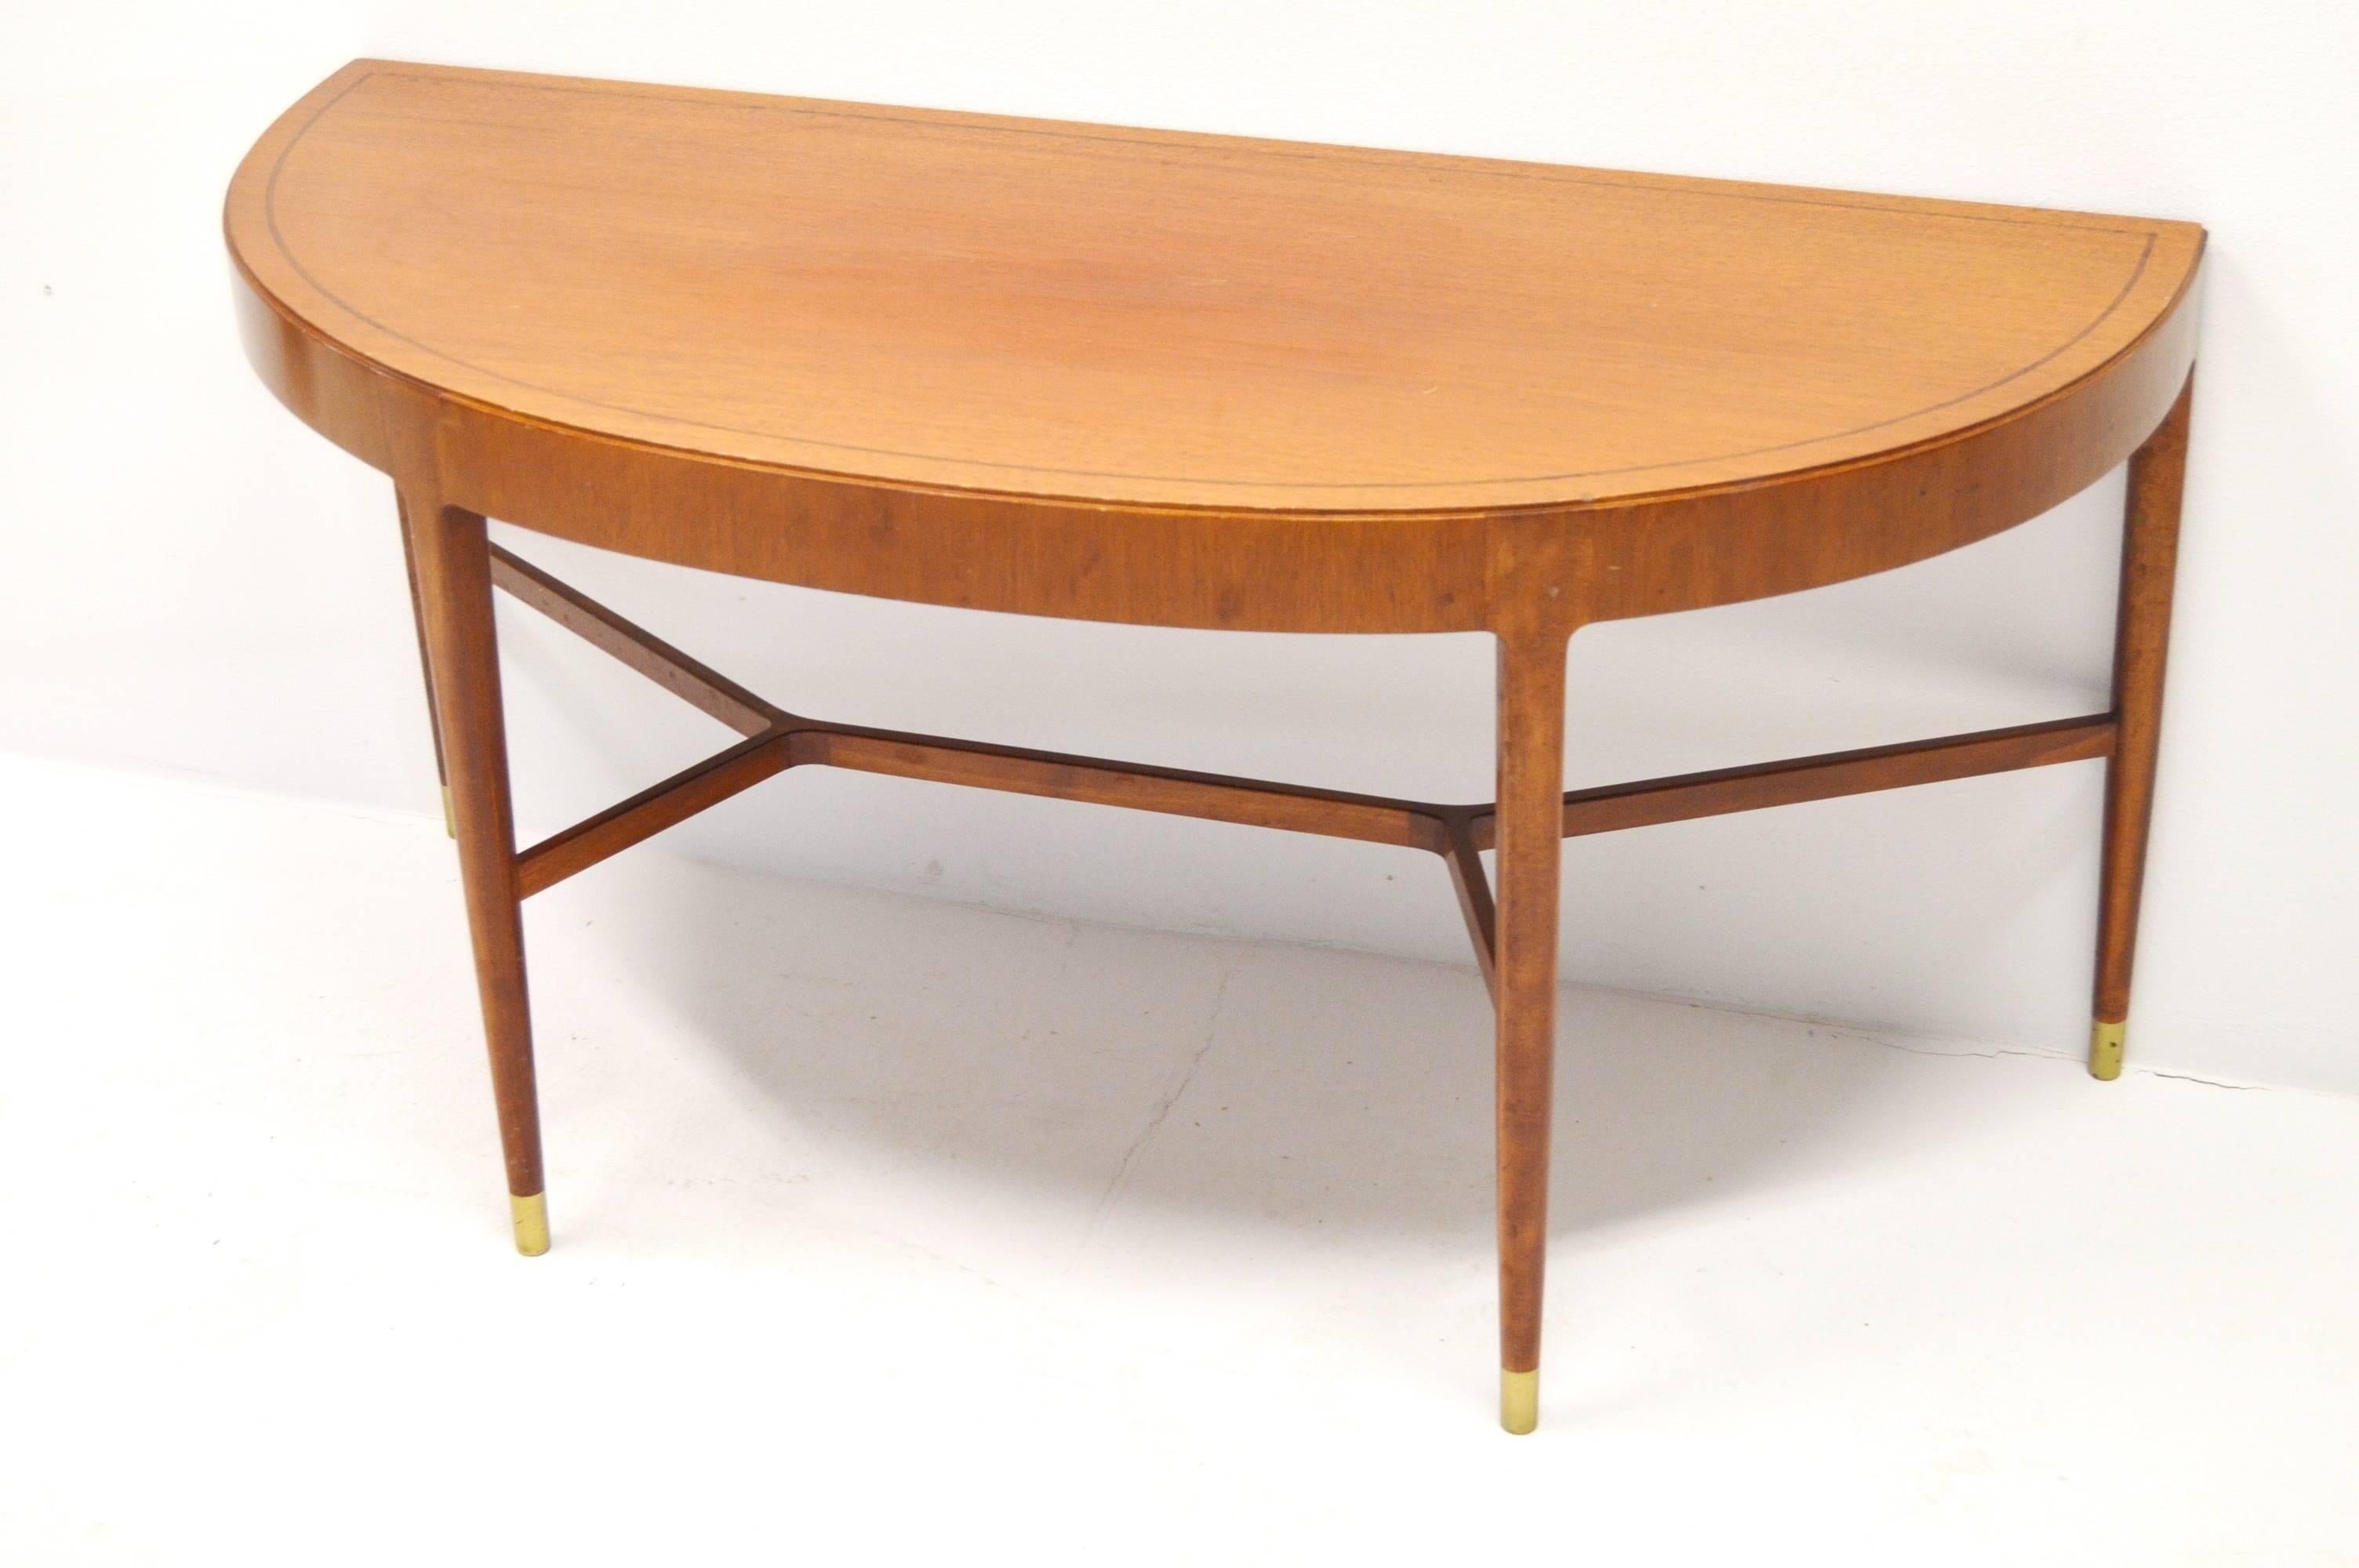 Stylish side table made of mahogany in the 1950s with fine carpentry and nice designs such as intarsia and brass details. Can be used as console table standing against a wall or just as a side table.